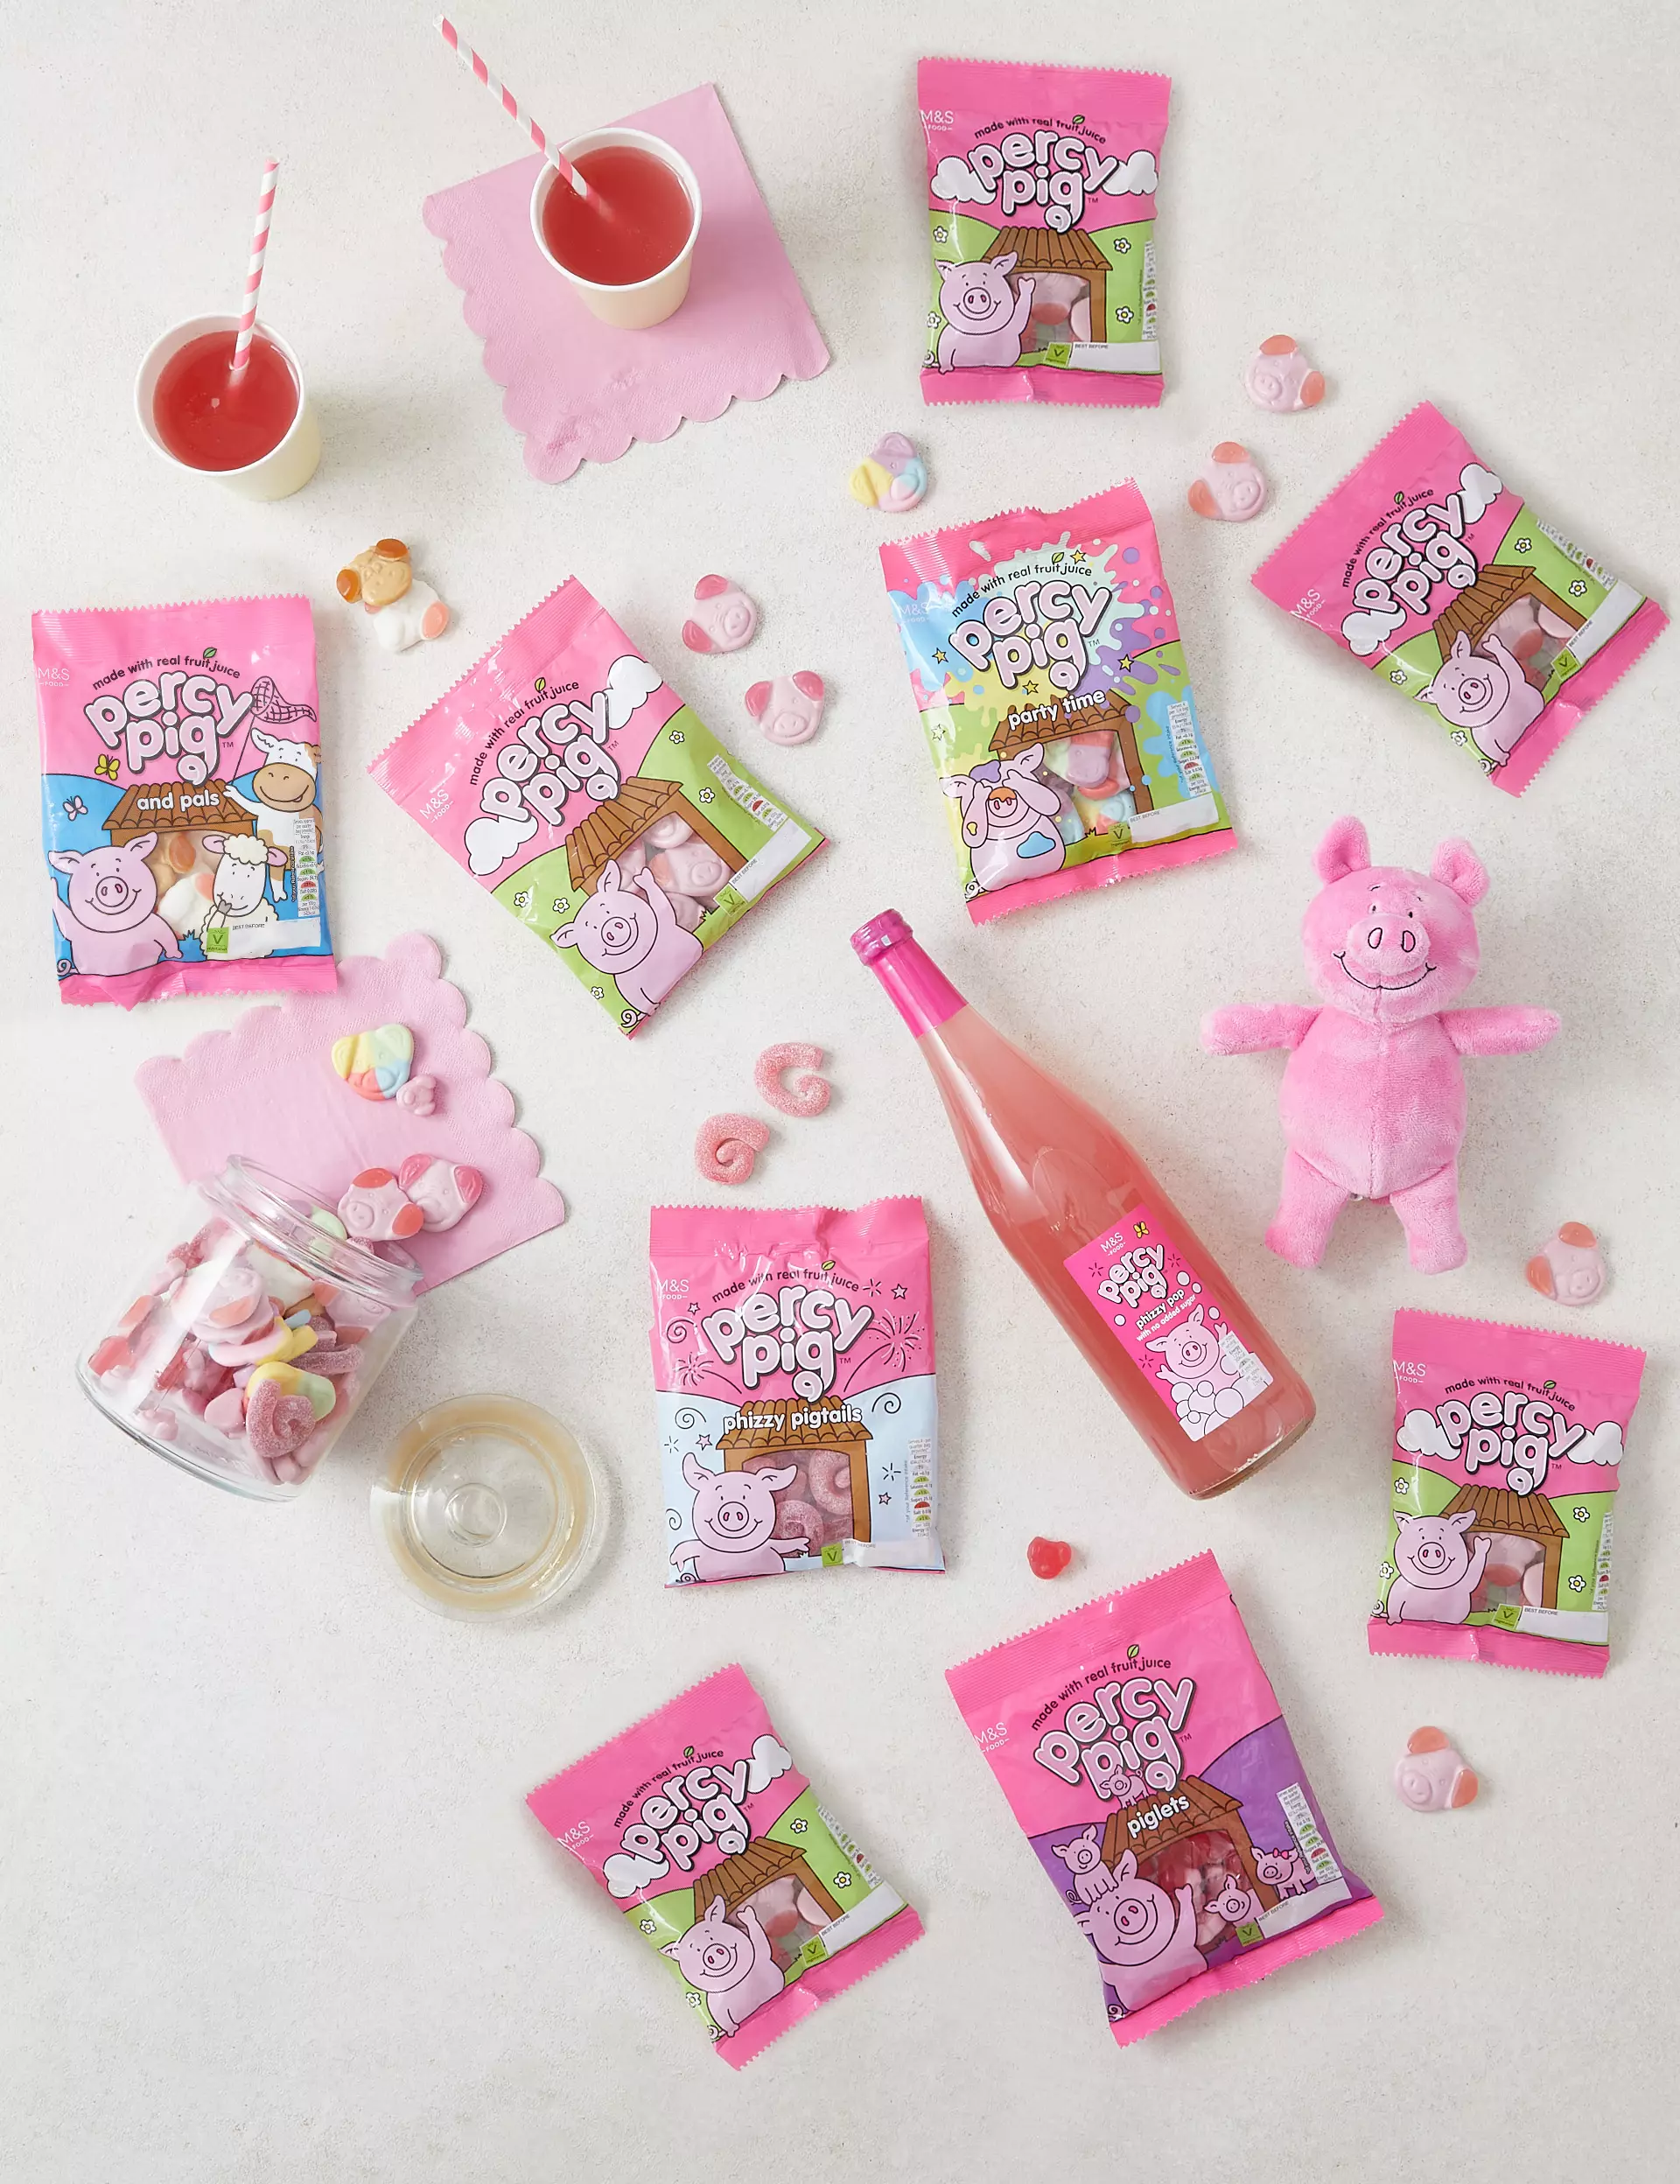 The new Percy Pig product joins lots of other goodies (